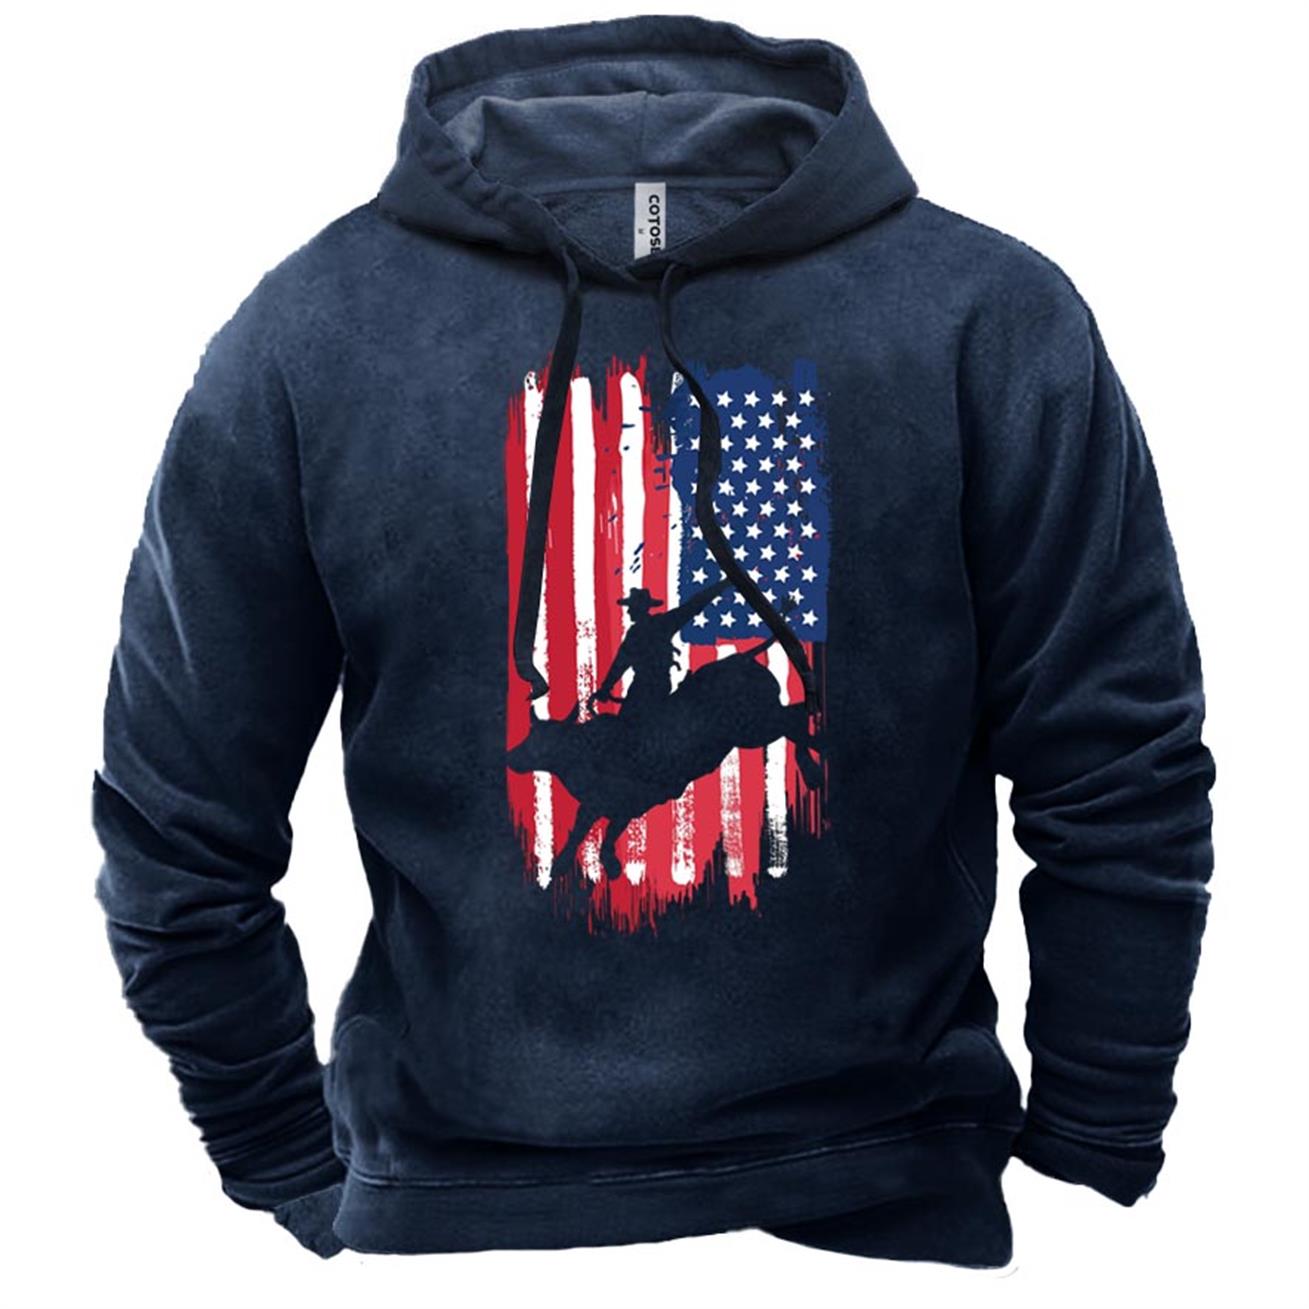 Men's Western Bull Riding Chic Rodeo Country American Print Hoodie